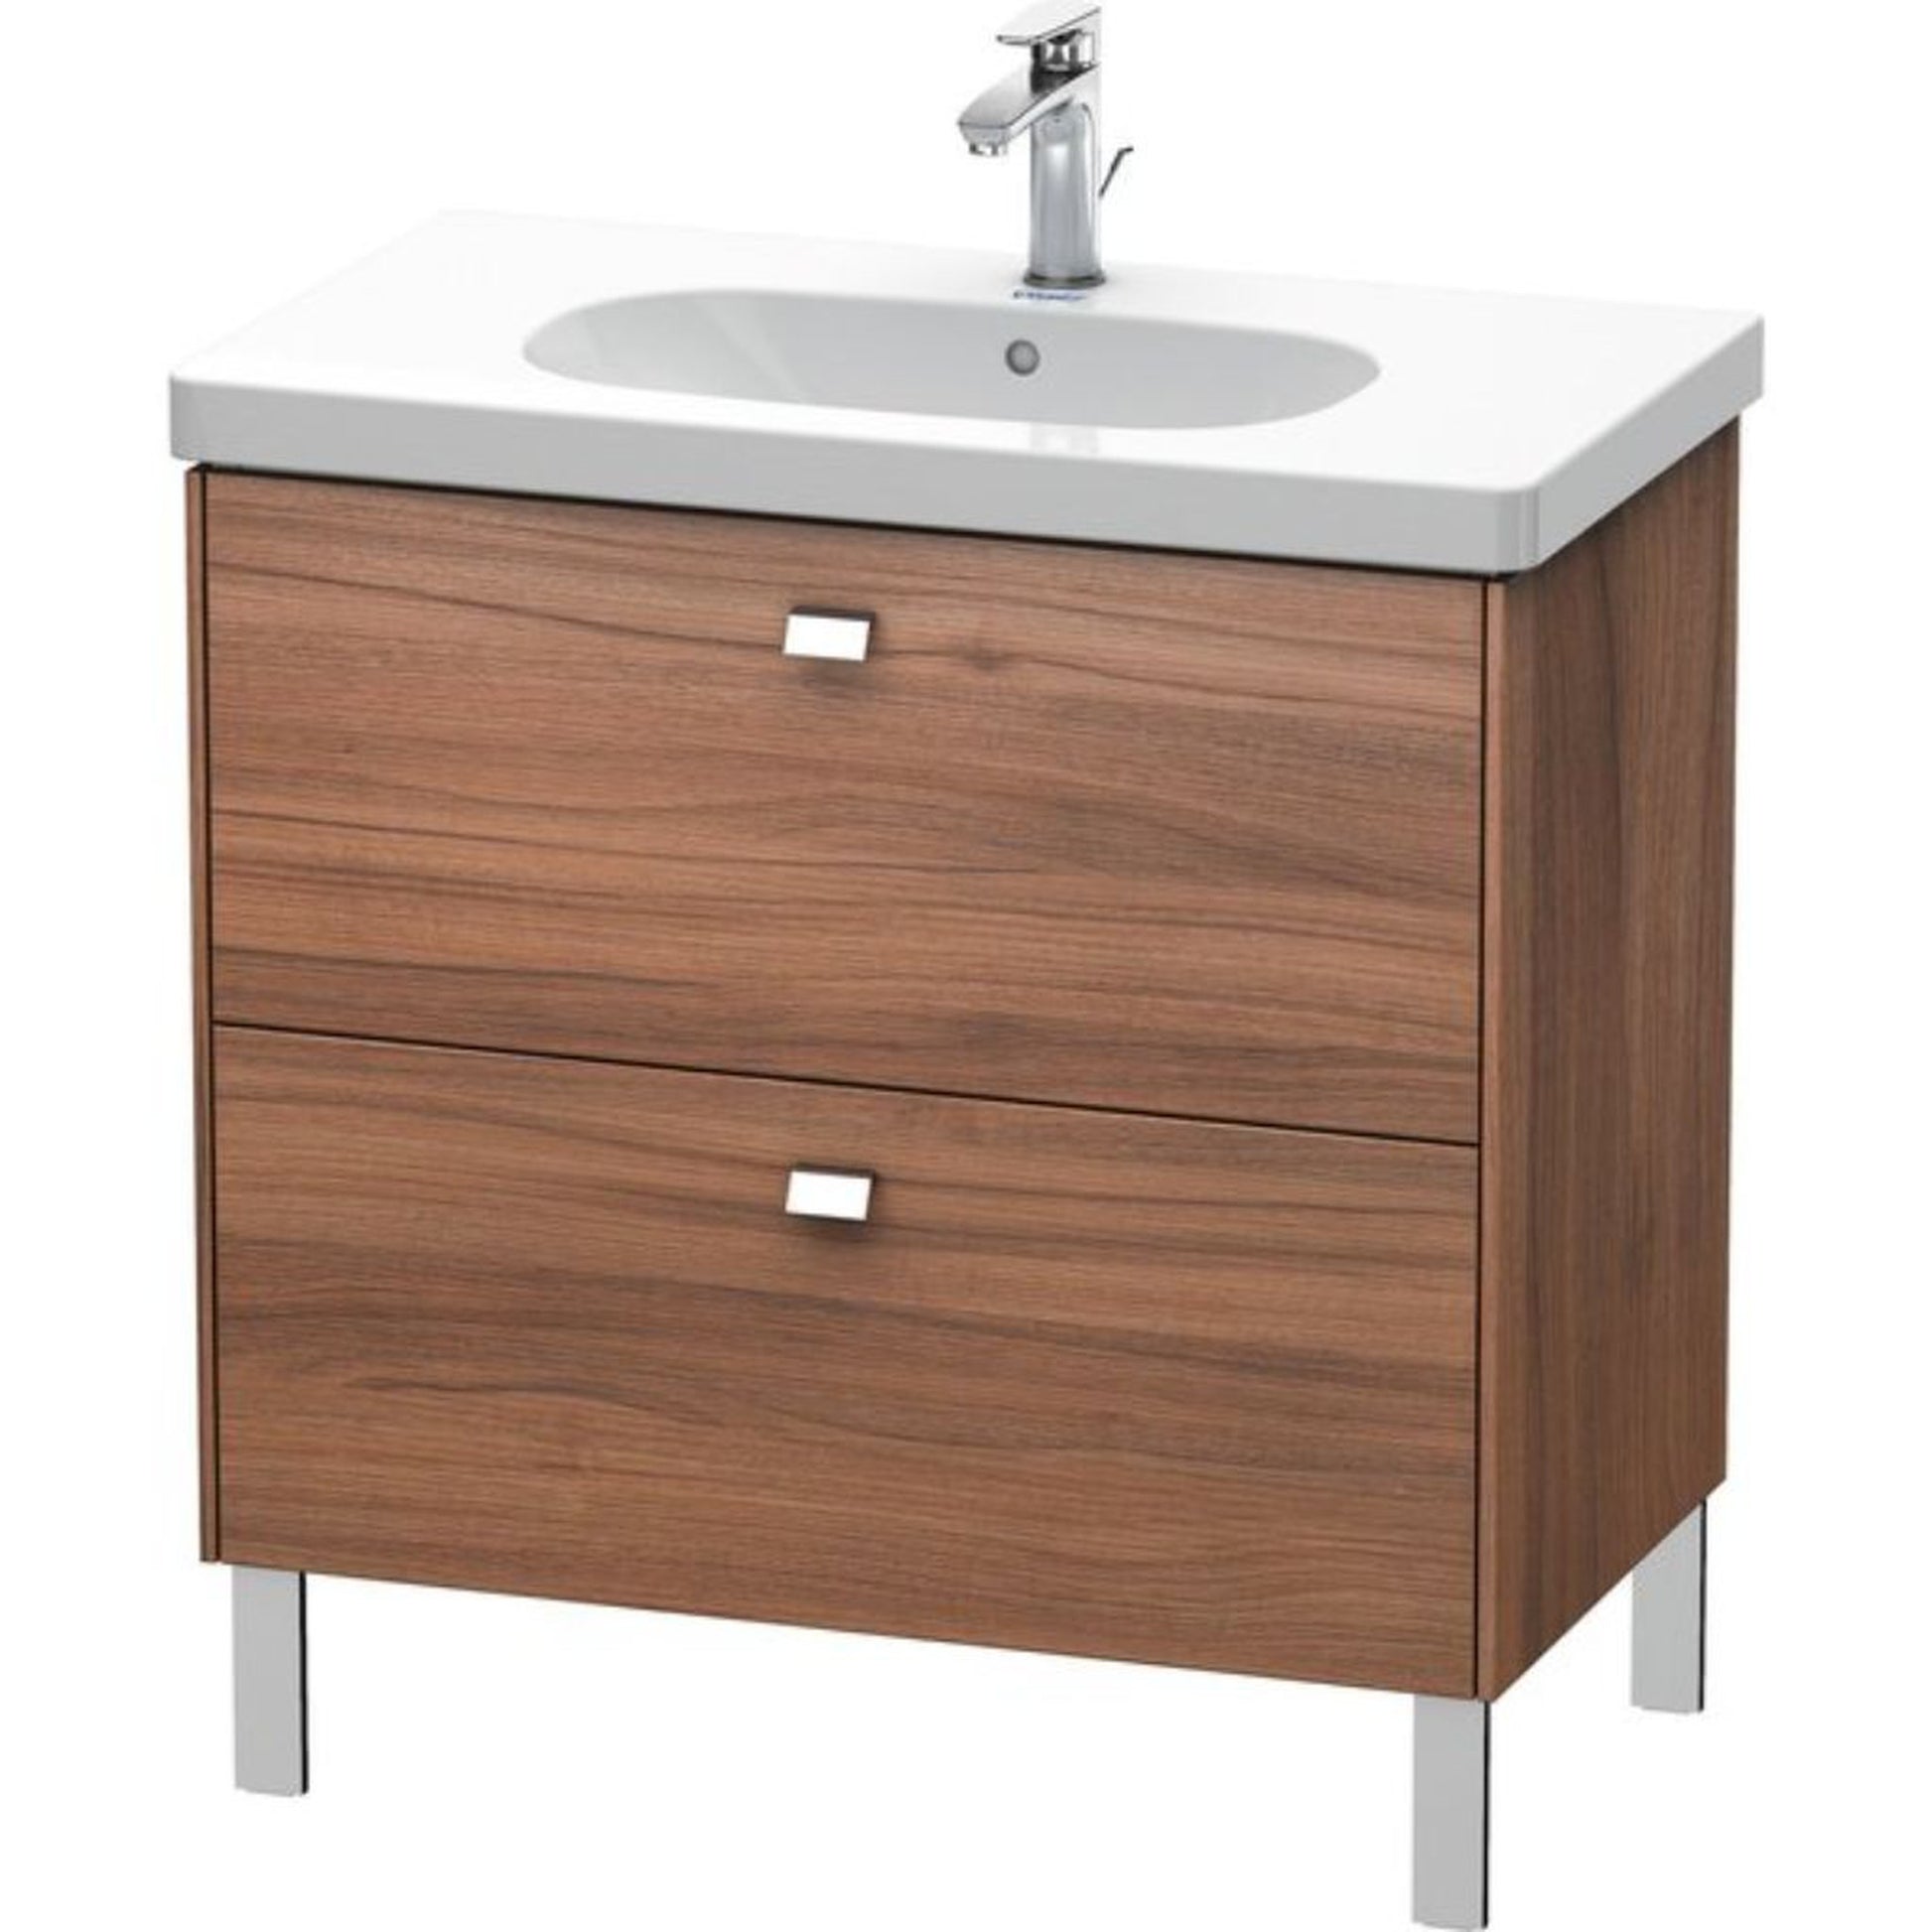 Duravit Brioso BR44260 32" x 27" x 18" Two Drawer Floor Standing Vanity Unit in Natural Walnut and Chrome Handle